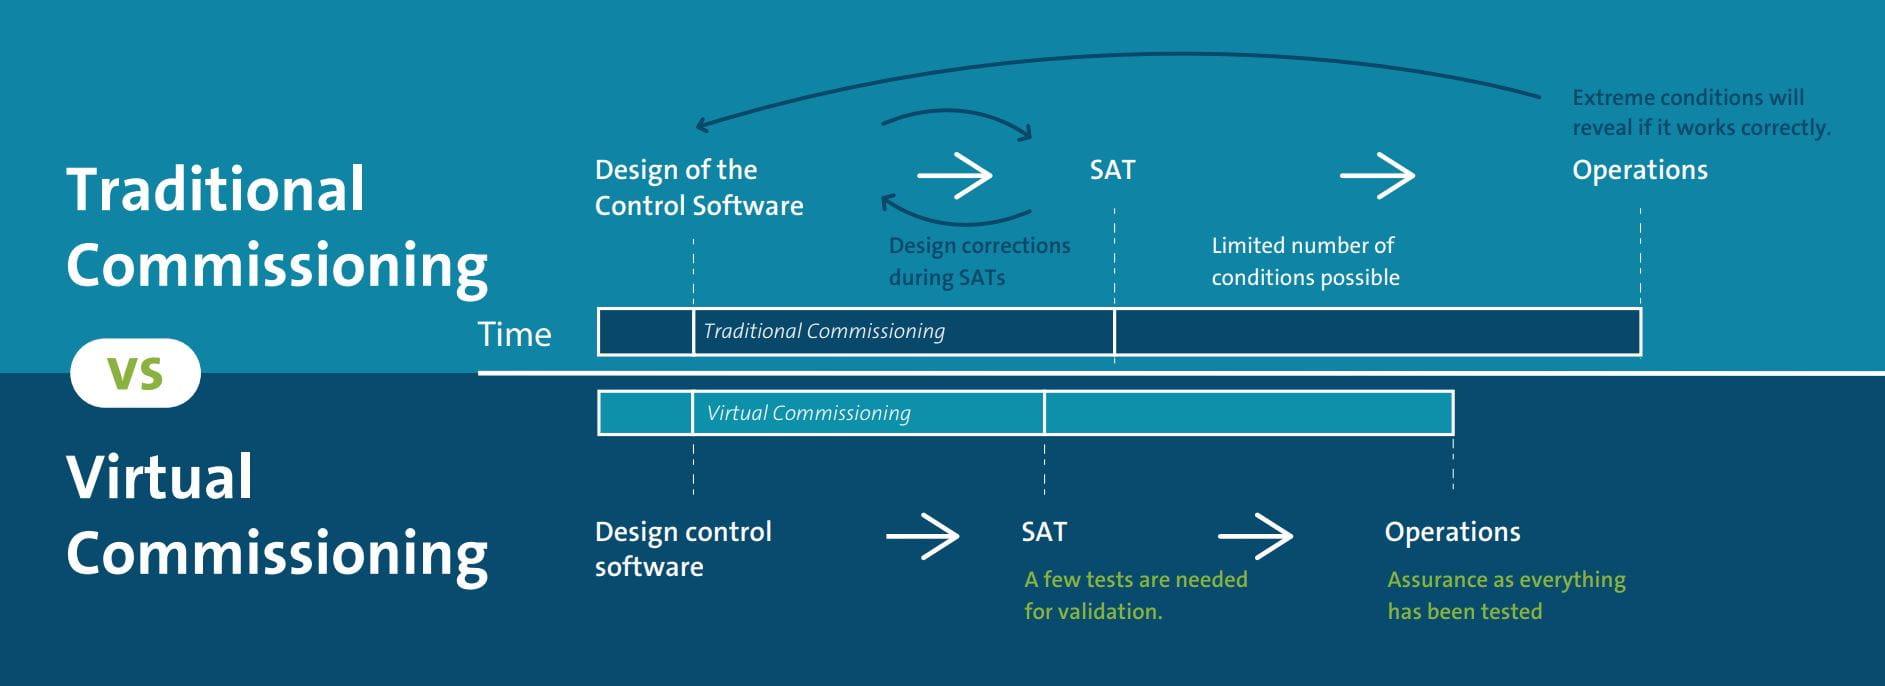 traditional commissioning vs virtual commissioning on wastewater treatment